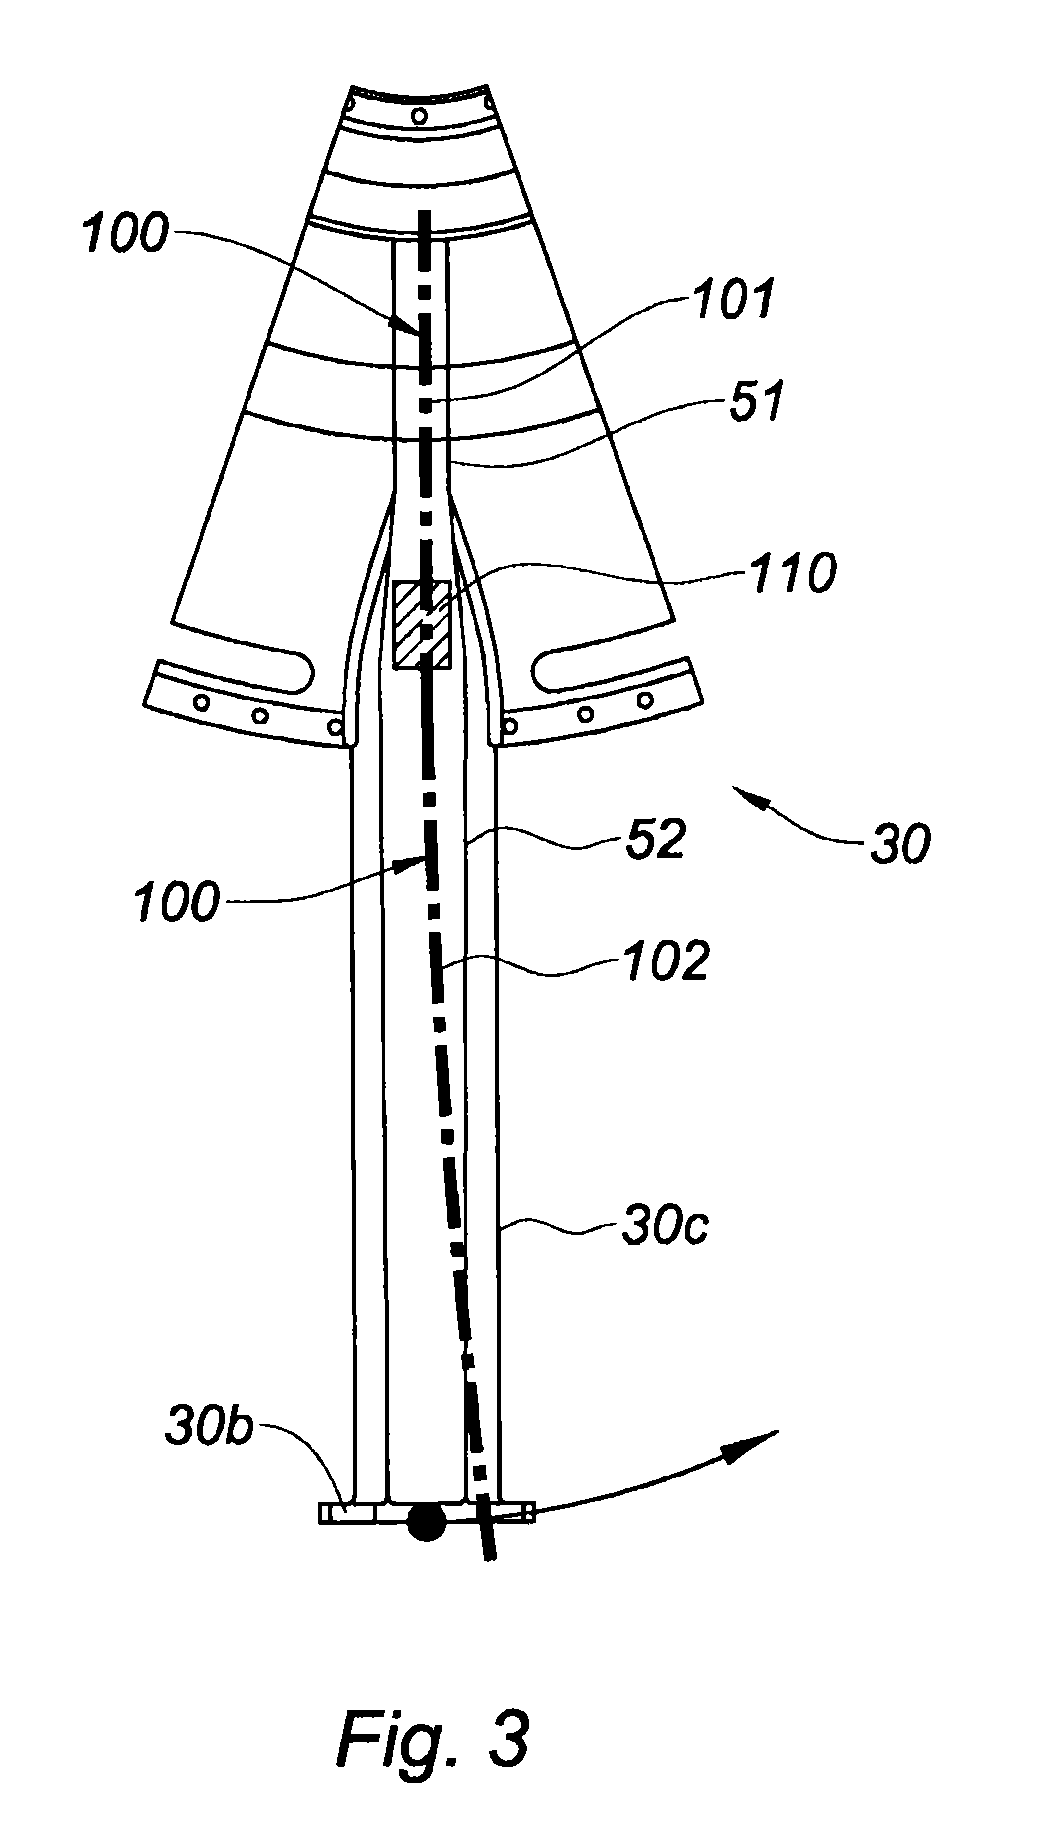 Driveshaft for the gearbox of auxiliary machines of a turbojet engine